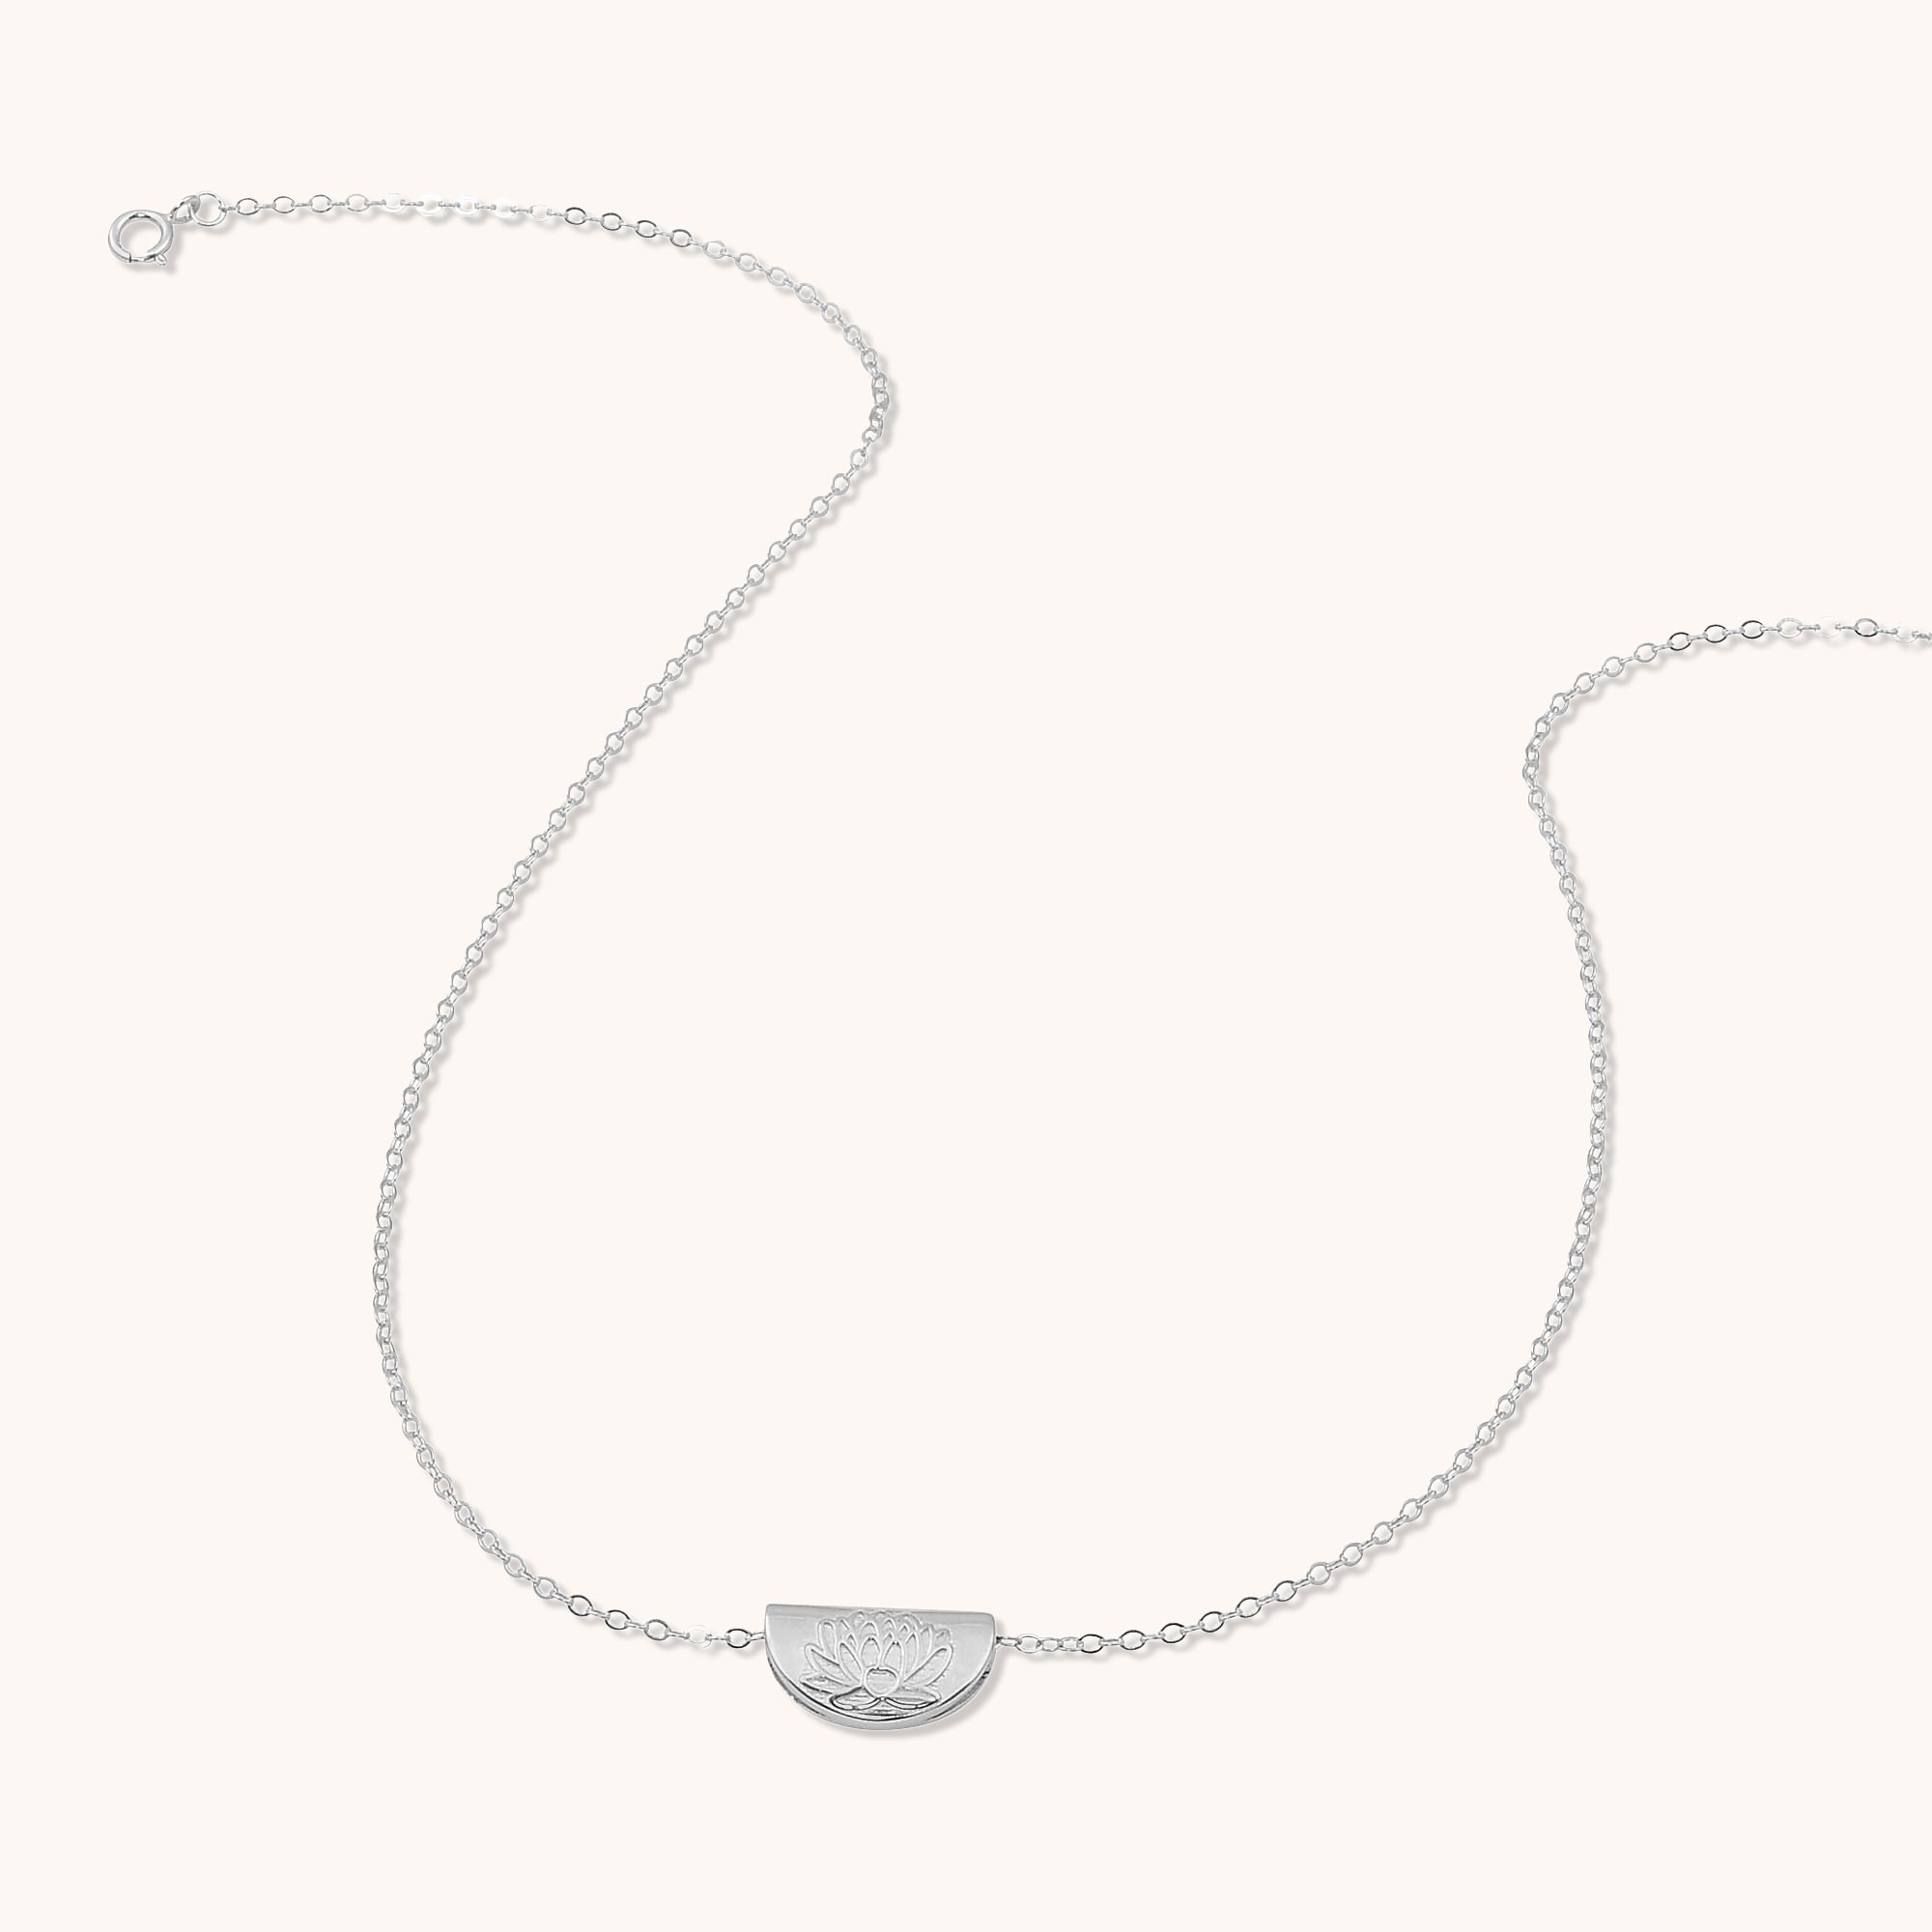 Birth Flower Necklace July (Lotus) Silver